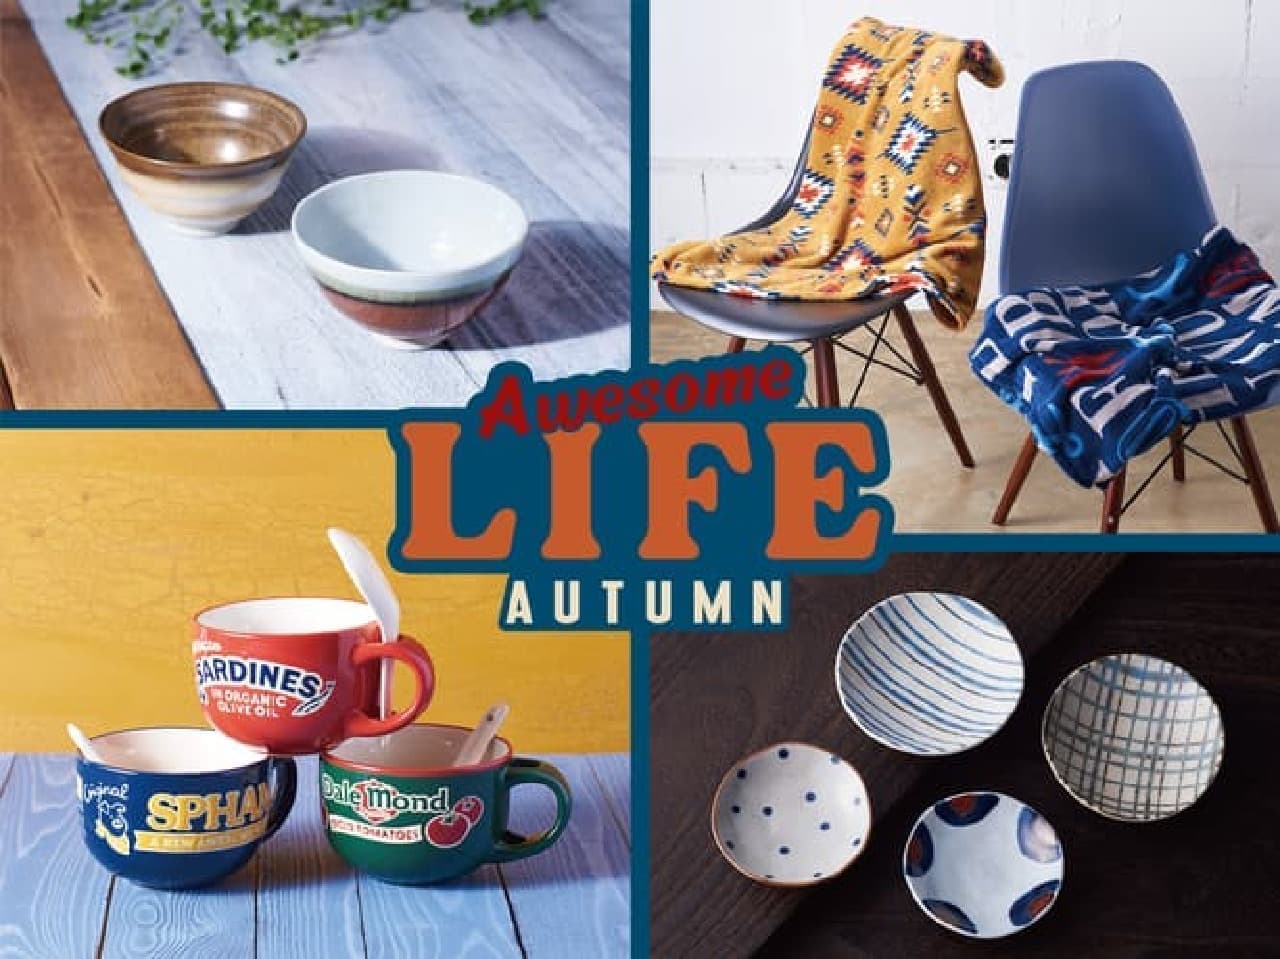 AWESOME STORE Autumn Goods --Petit Plastic Japanese Tableware, Mug with Spoon, etc.